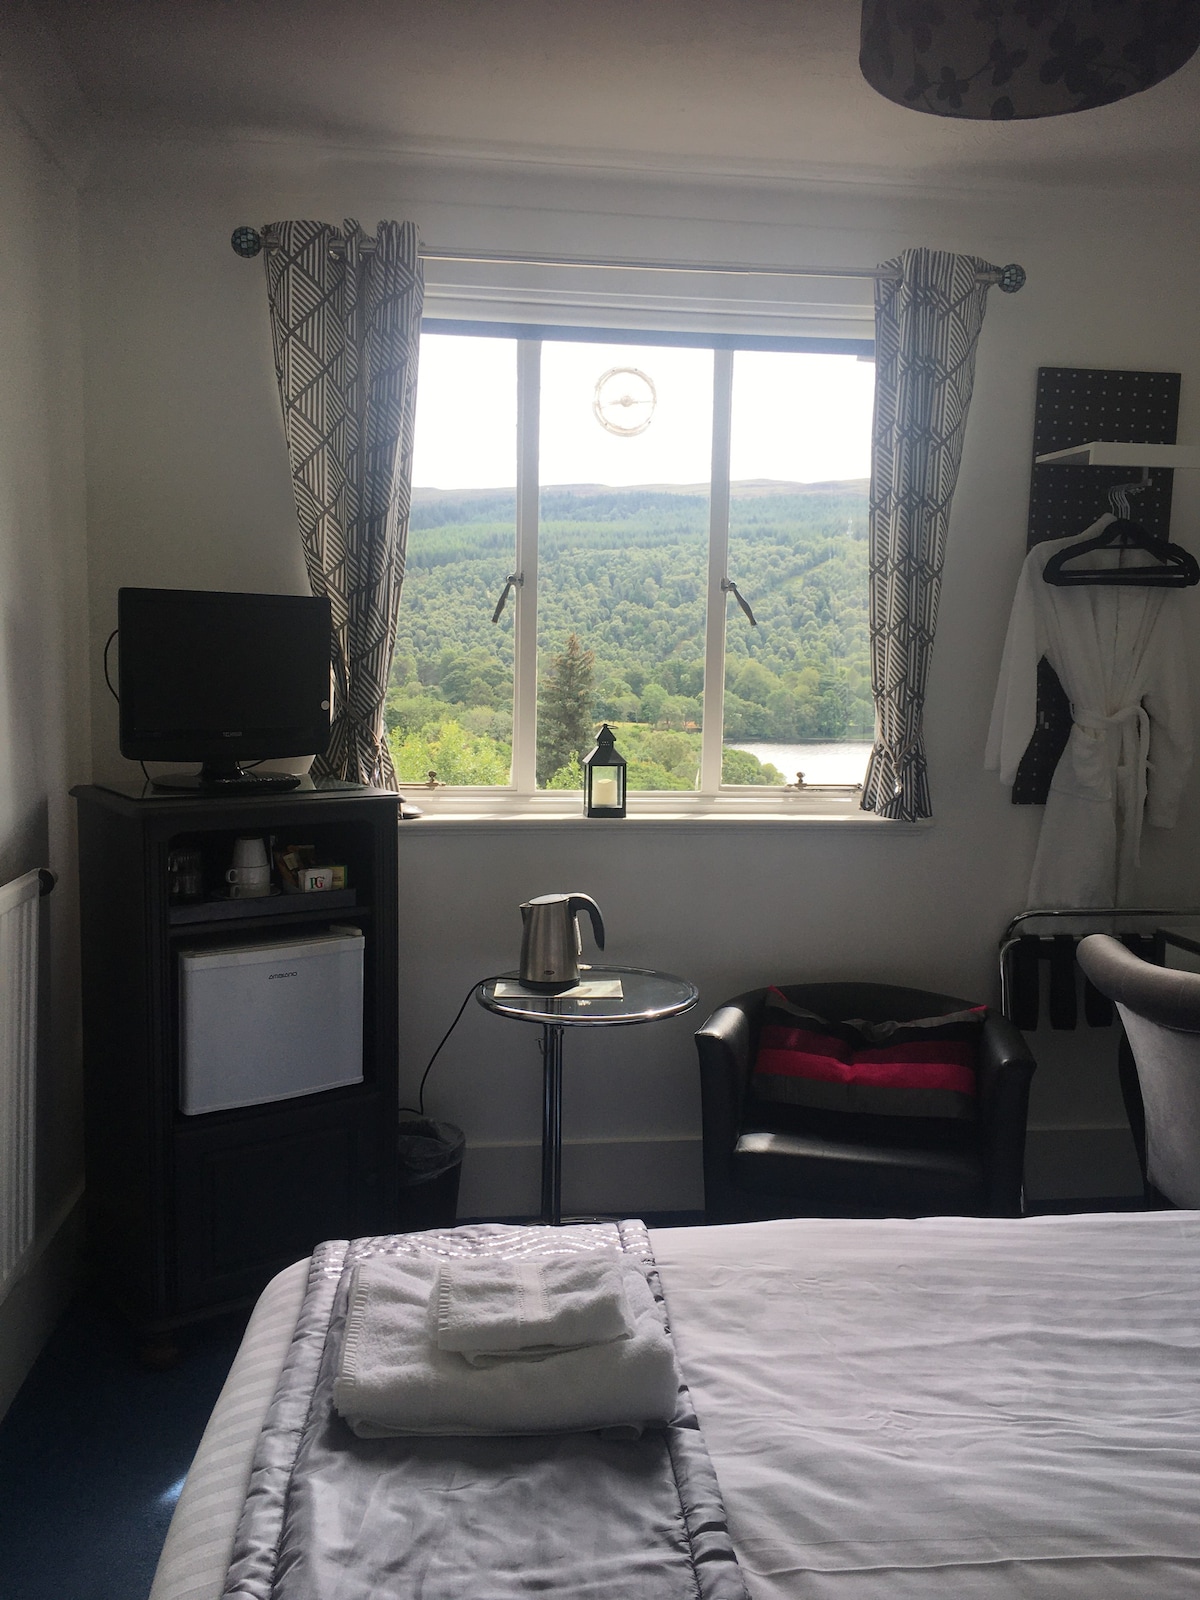 Ensuite double bedroom with amazing views